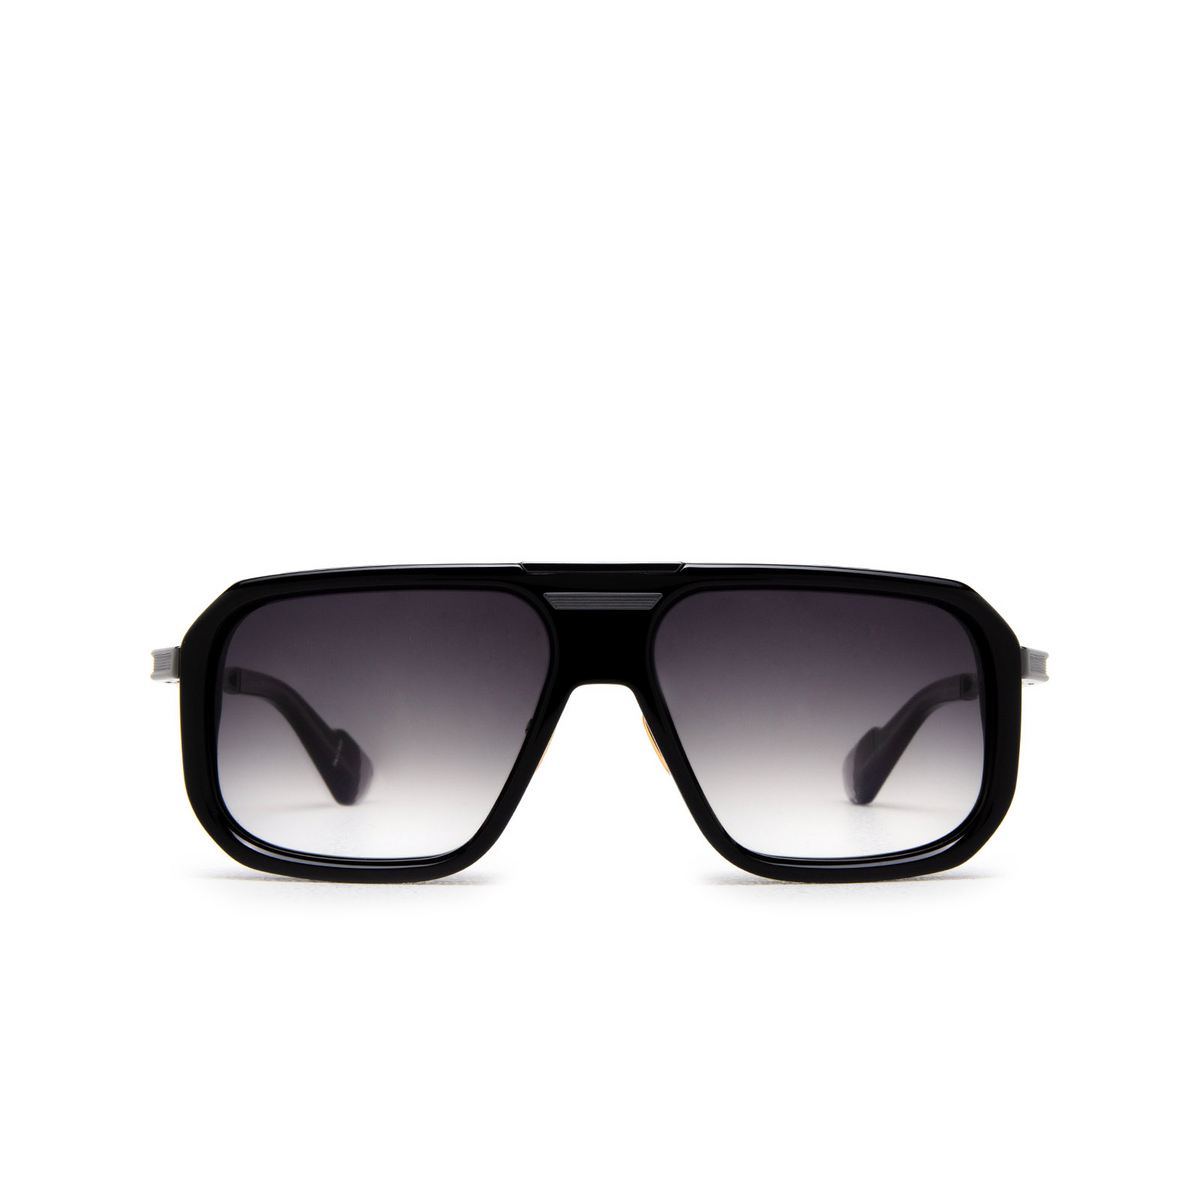 Jacques Marie Mage DONOHU Sunglasses OBERON - front view